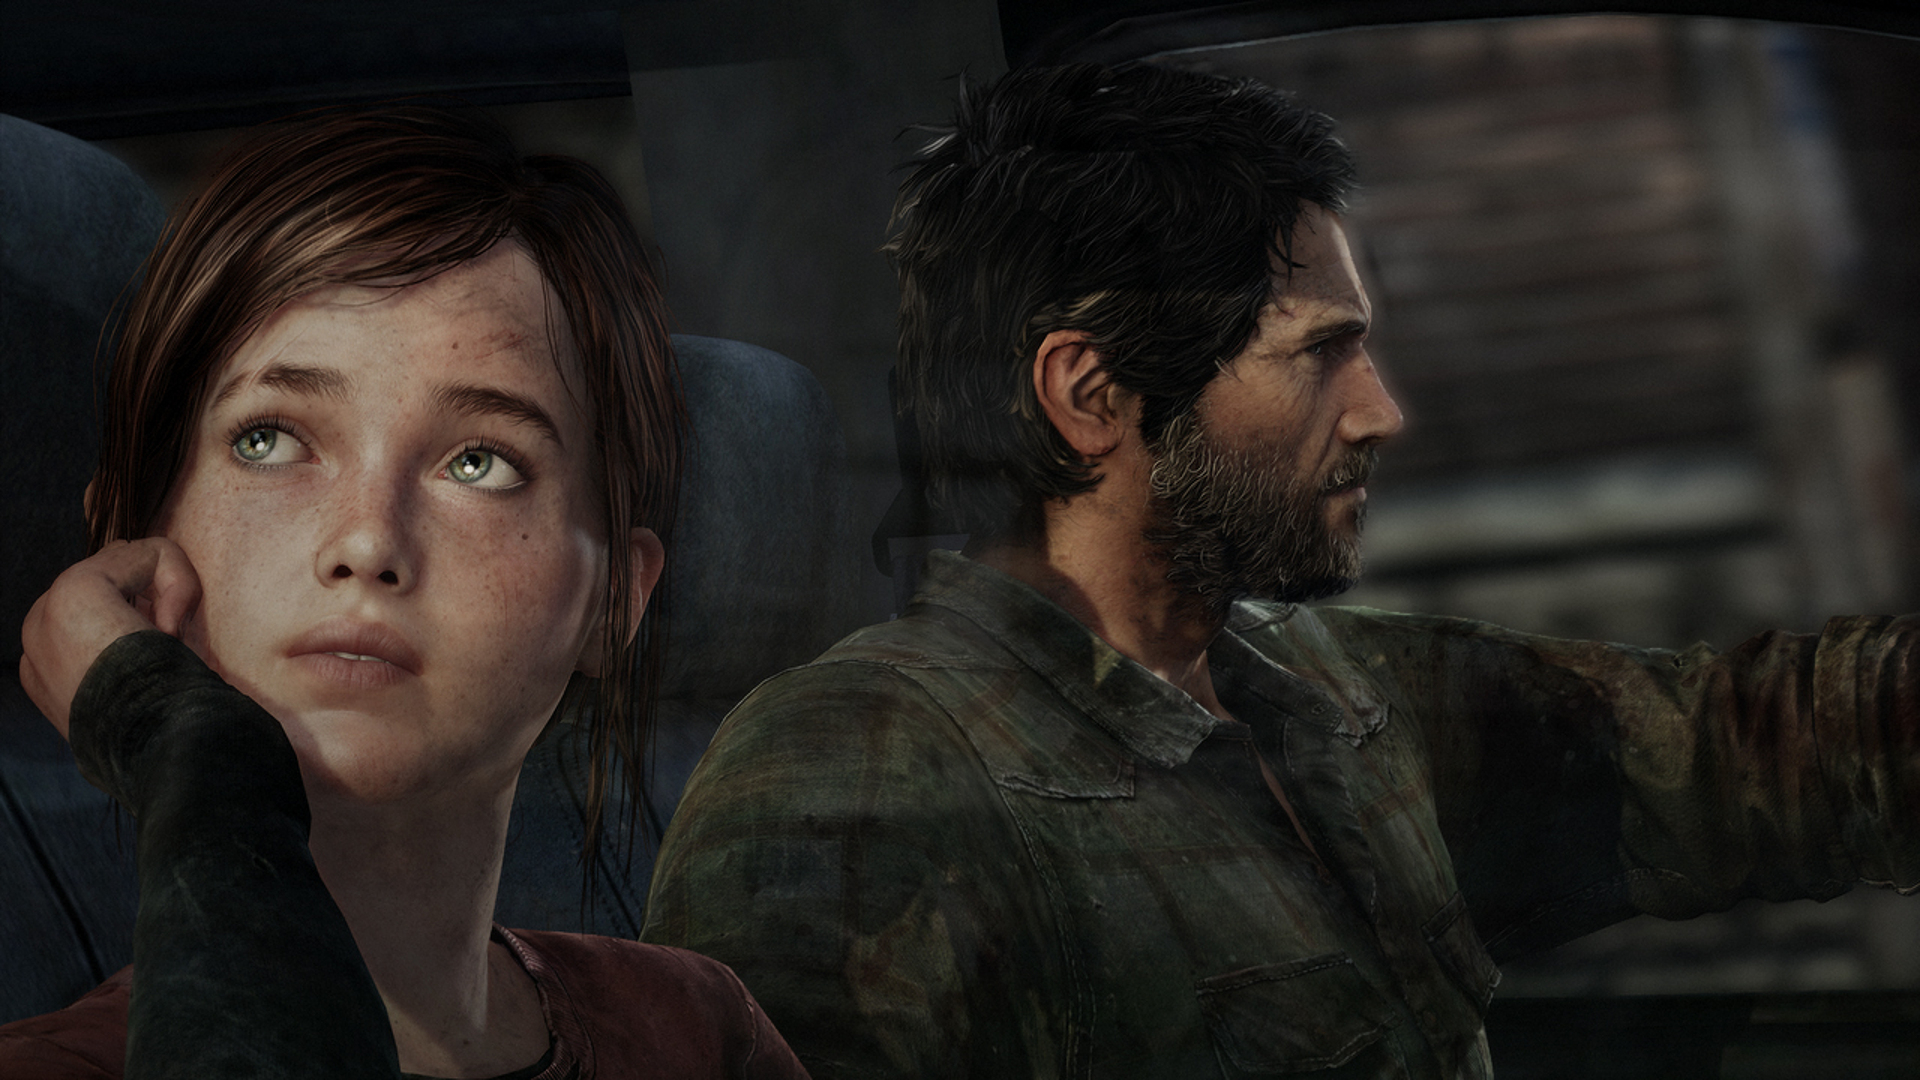   HBO  The Last of Us    2023 